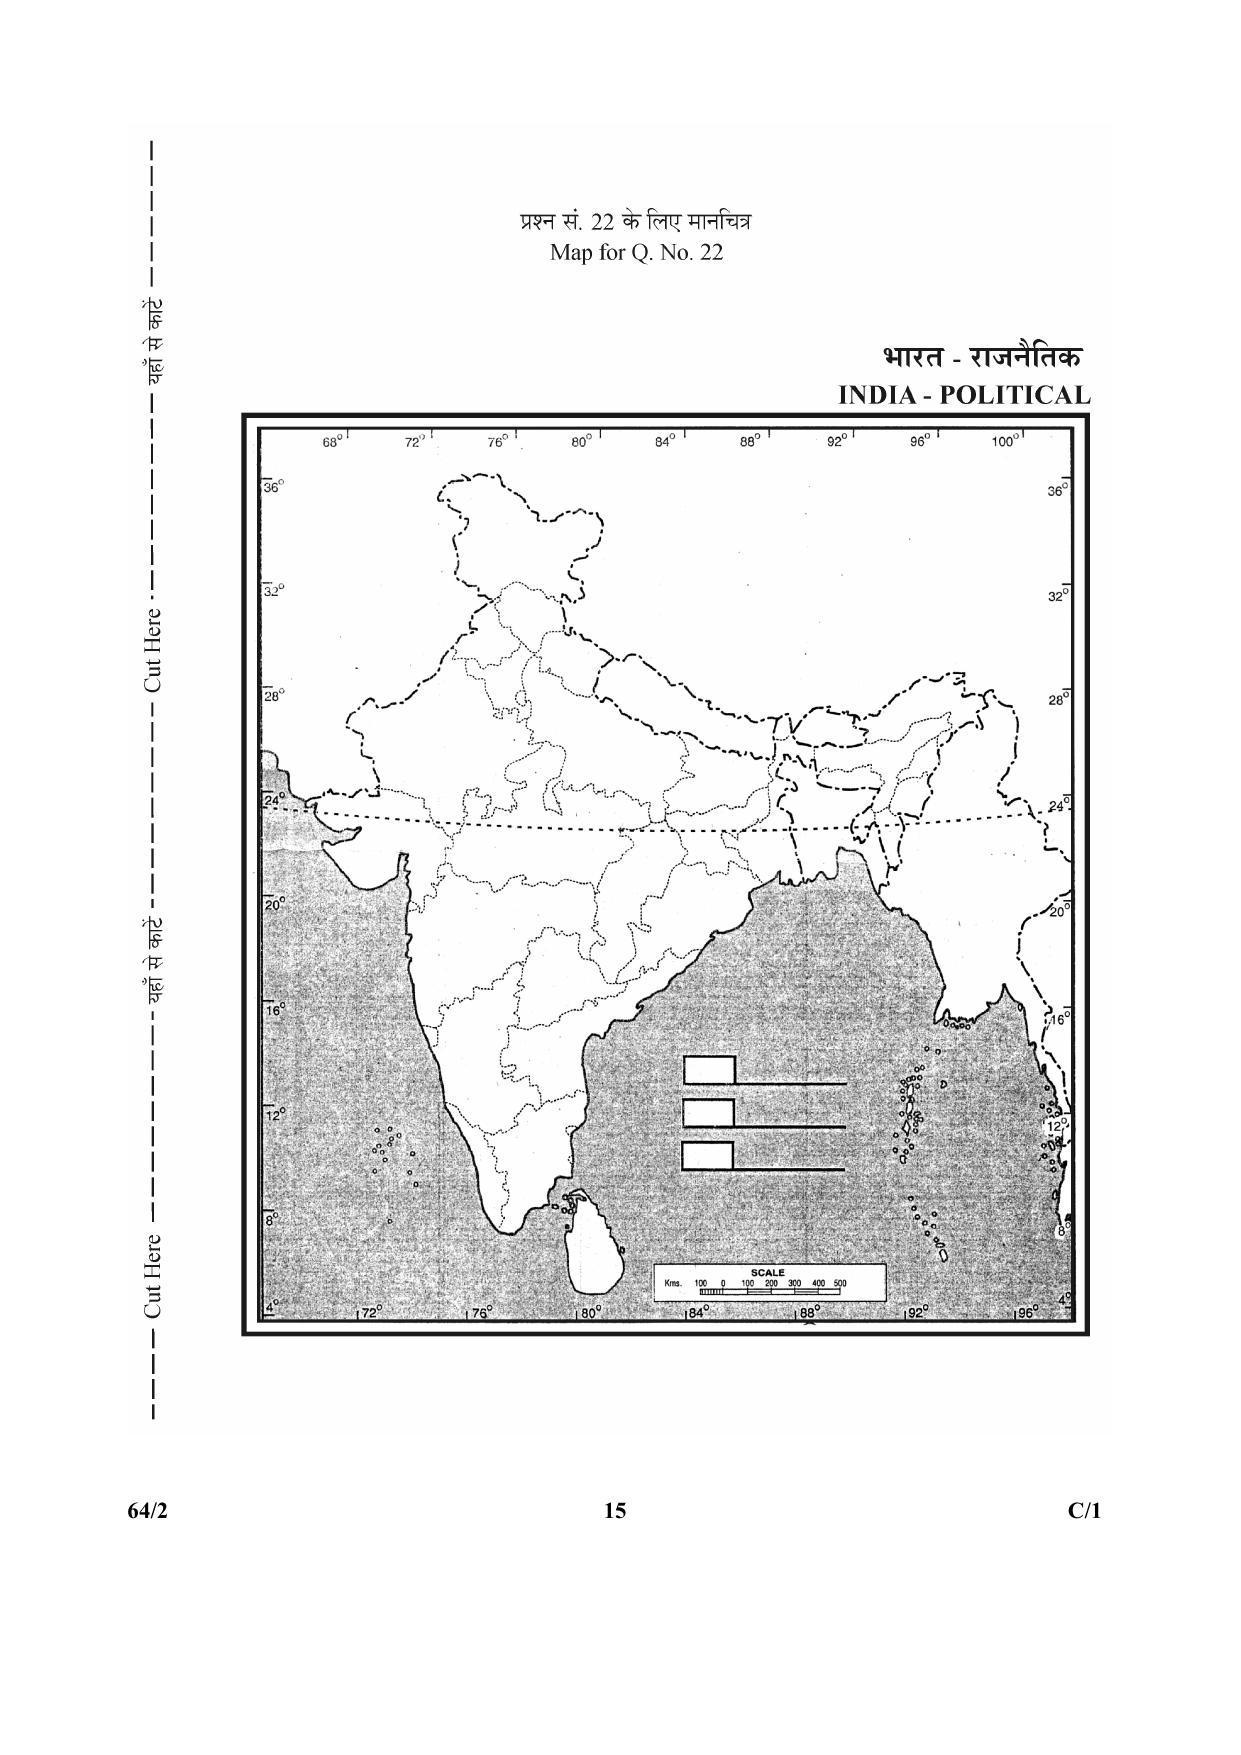 CBSE Class 12 64-2 (Geography) 2018 Compartment Question Paper - Page 15